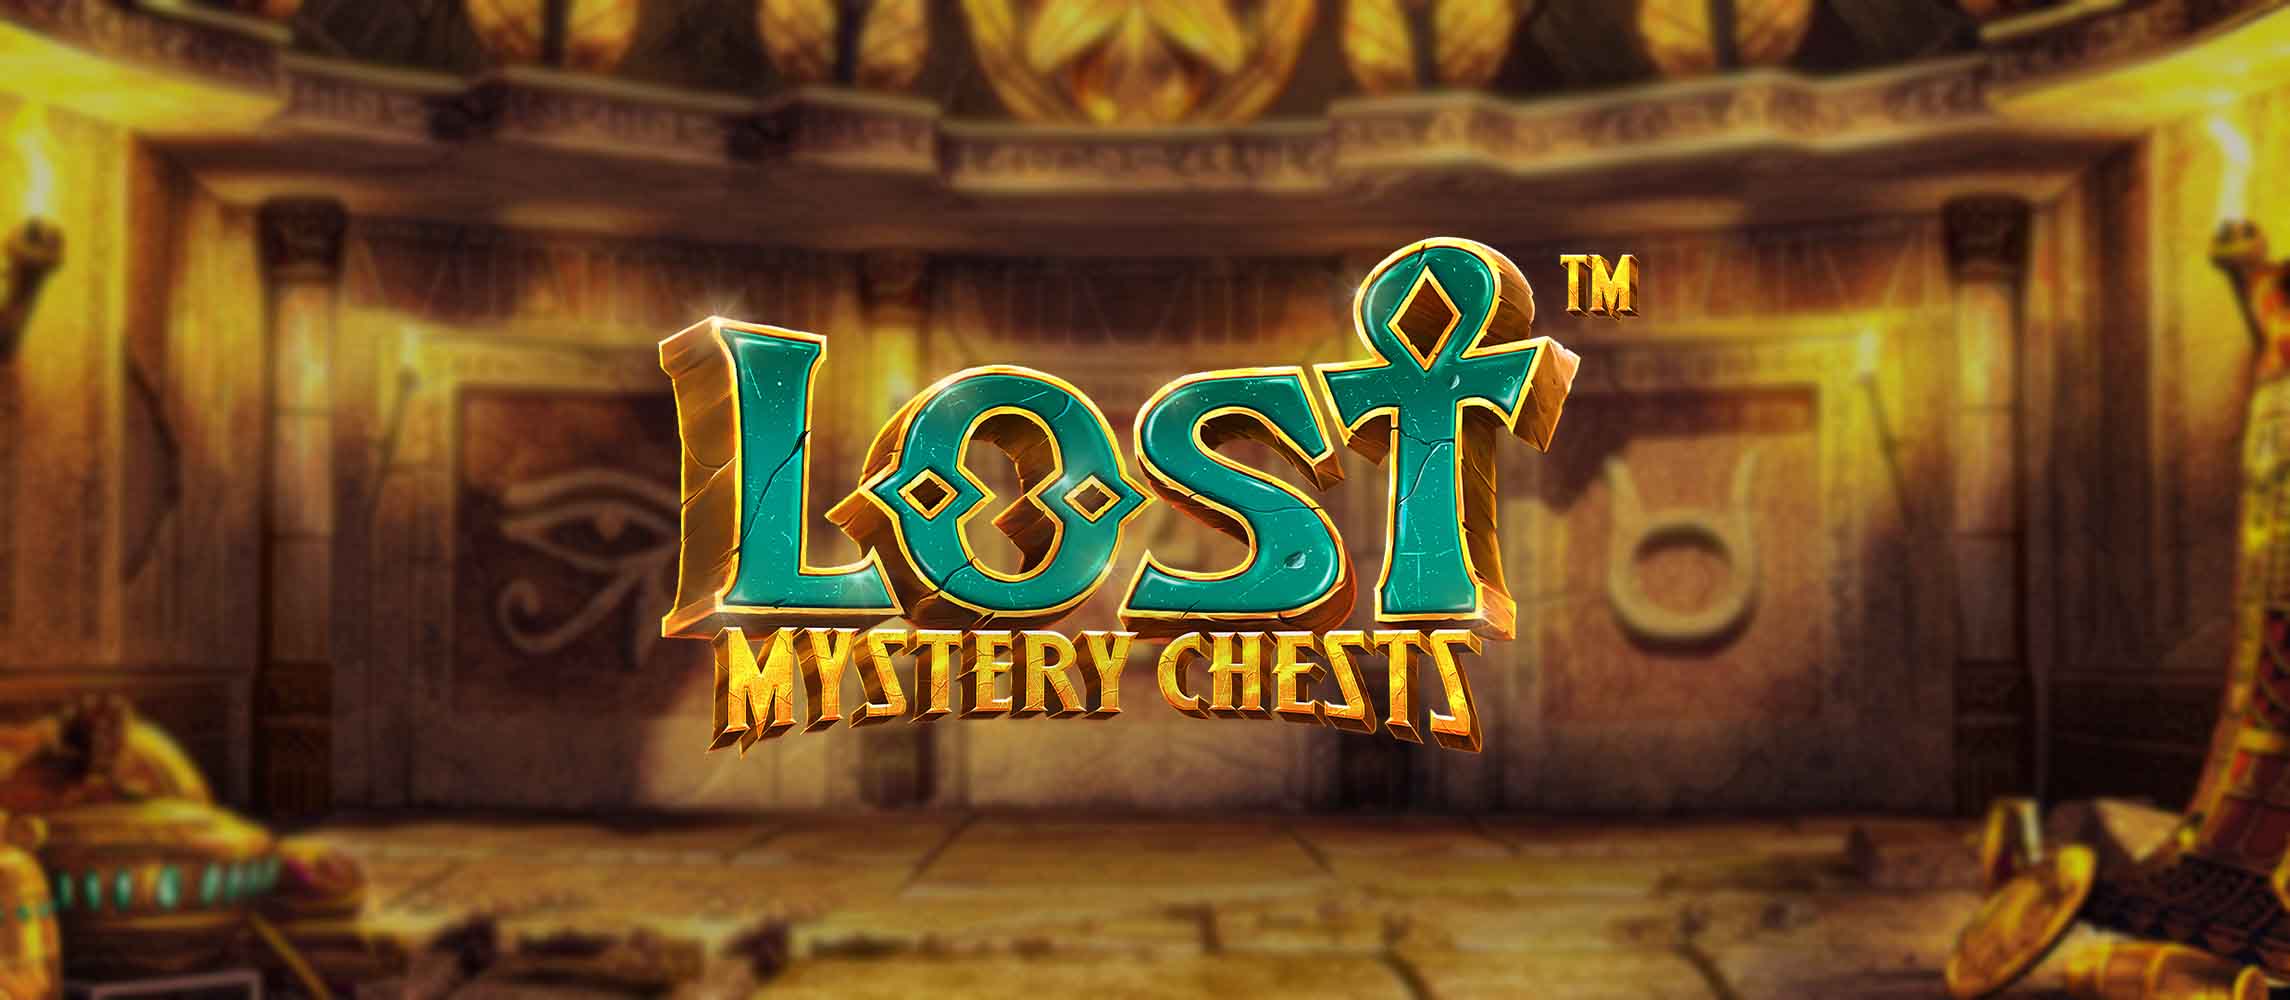 Lost Mystery Chests - BetSoft